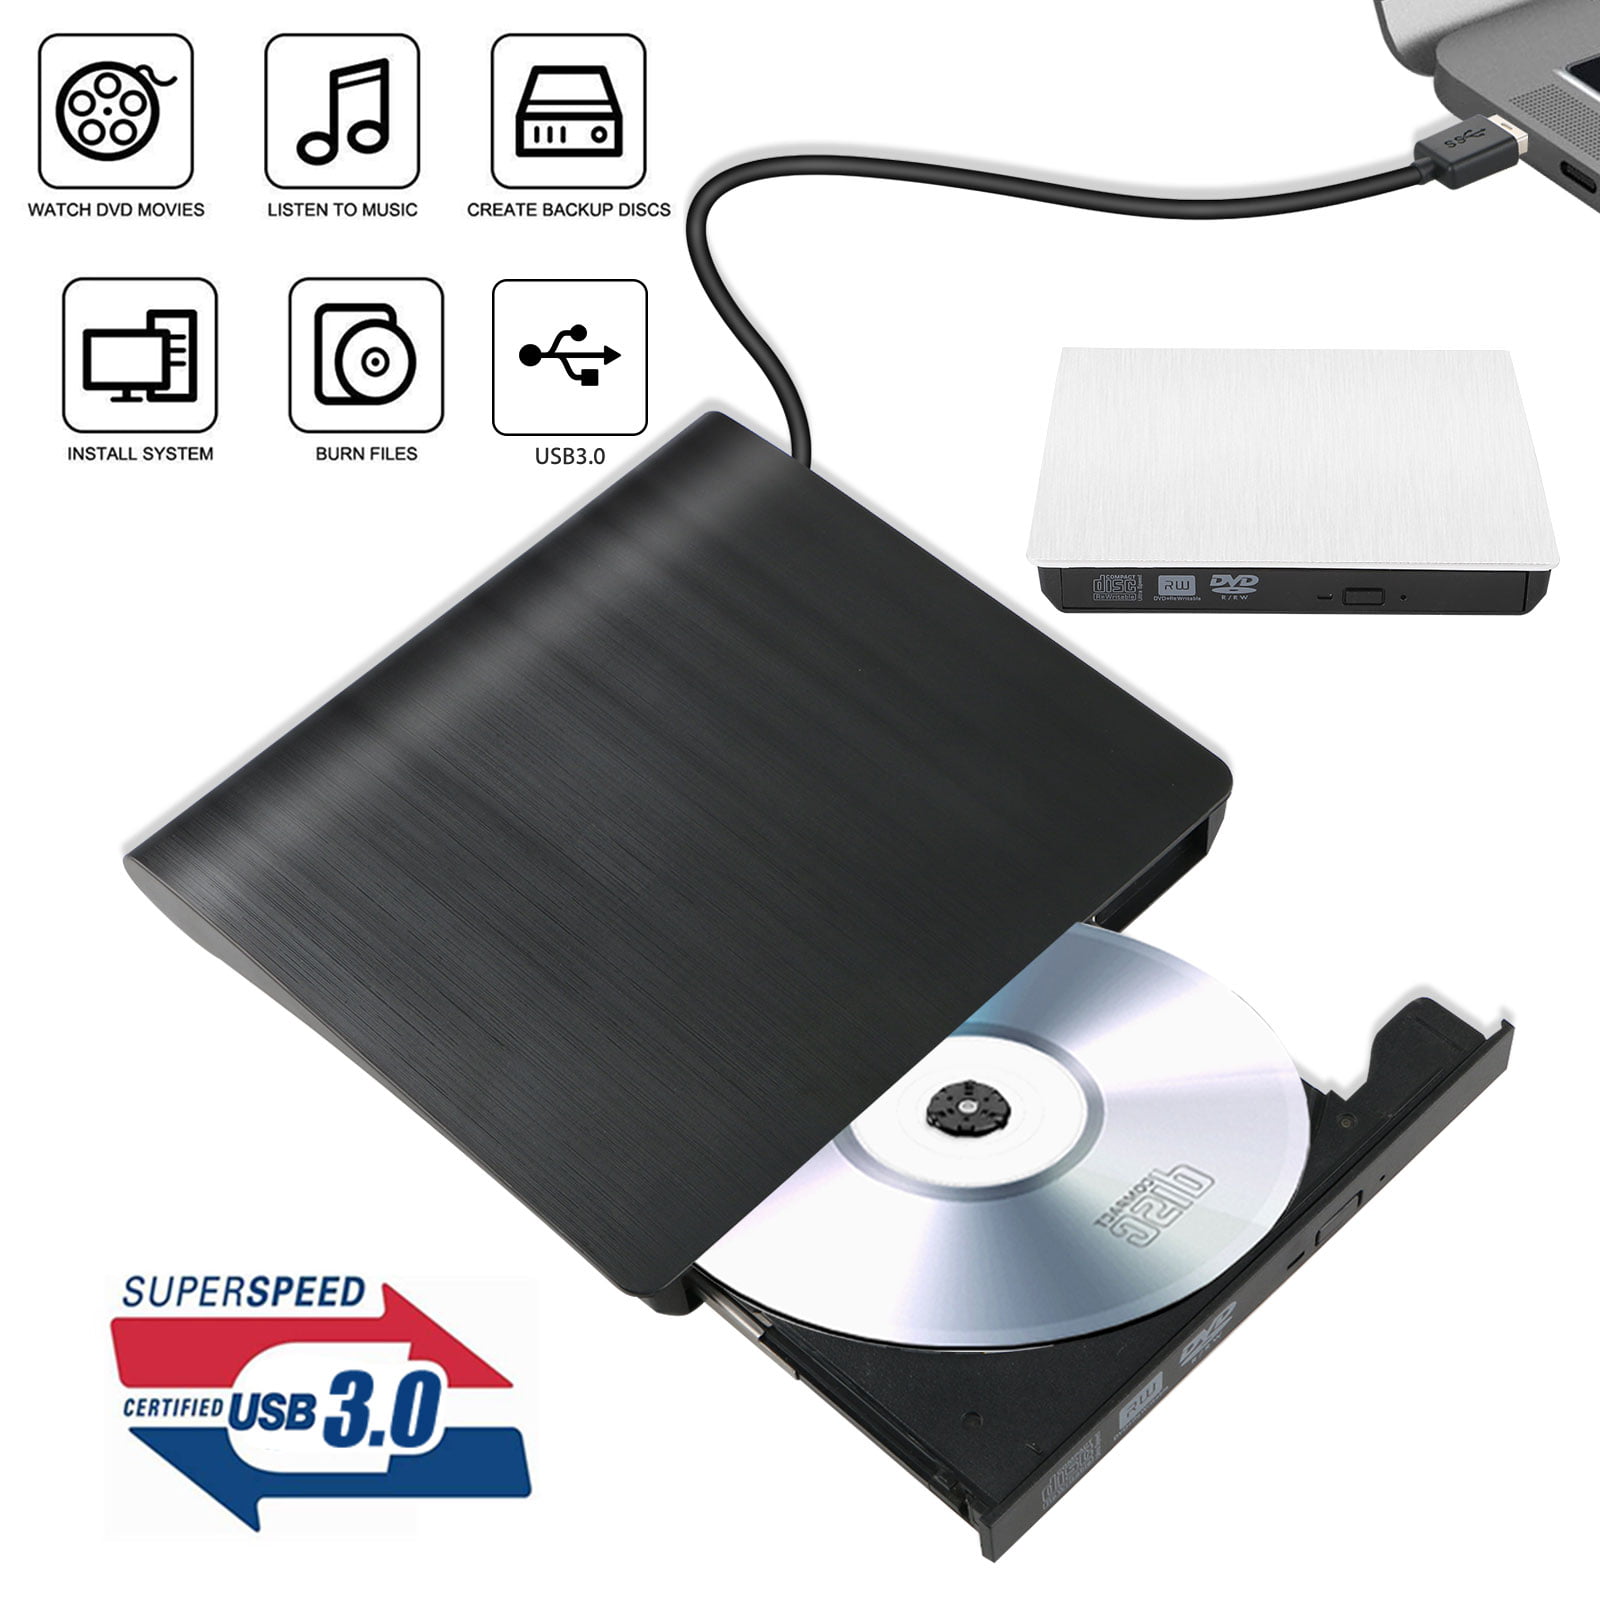 Portable Optical Burner USB 3.0 Portable Slim External DVD-RW Optical Drive Player Writer CD//DVD Player for PC Notebook Color : White, Size : One Size